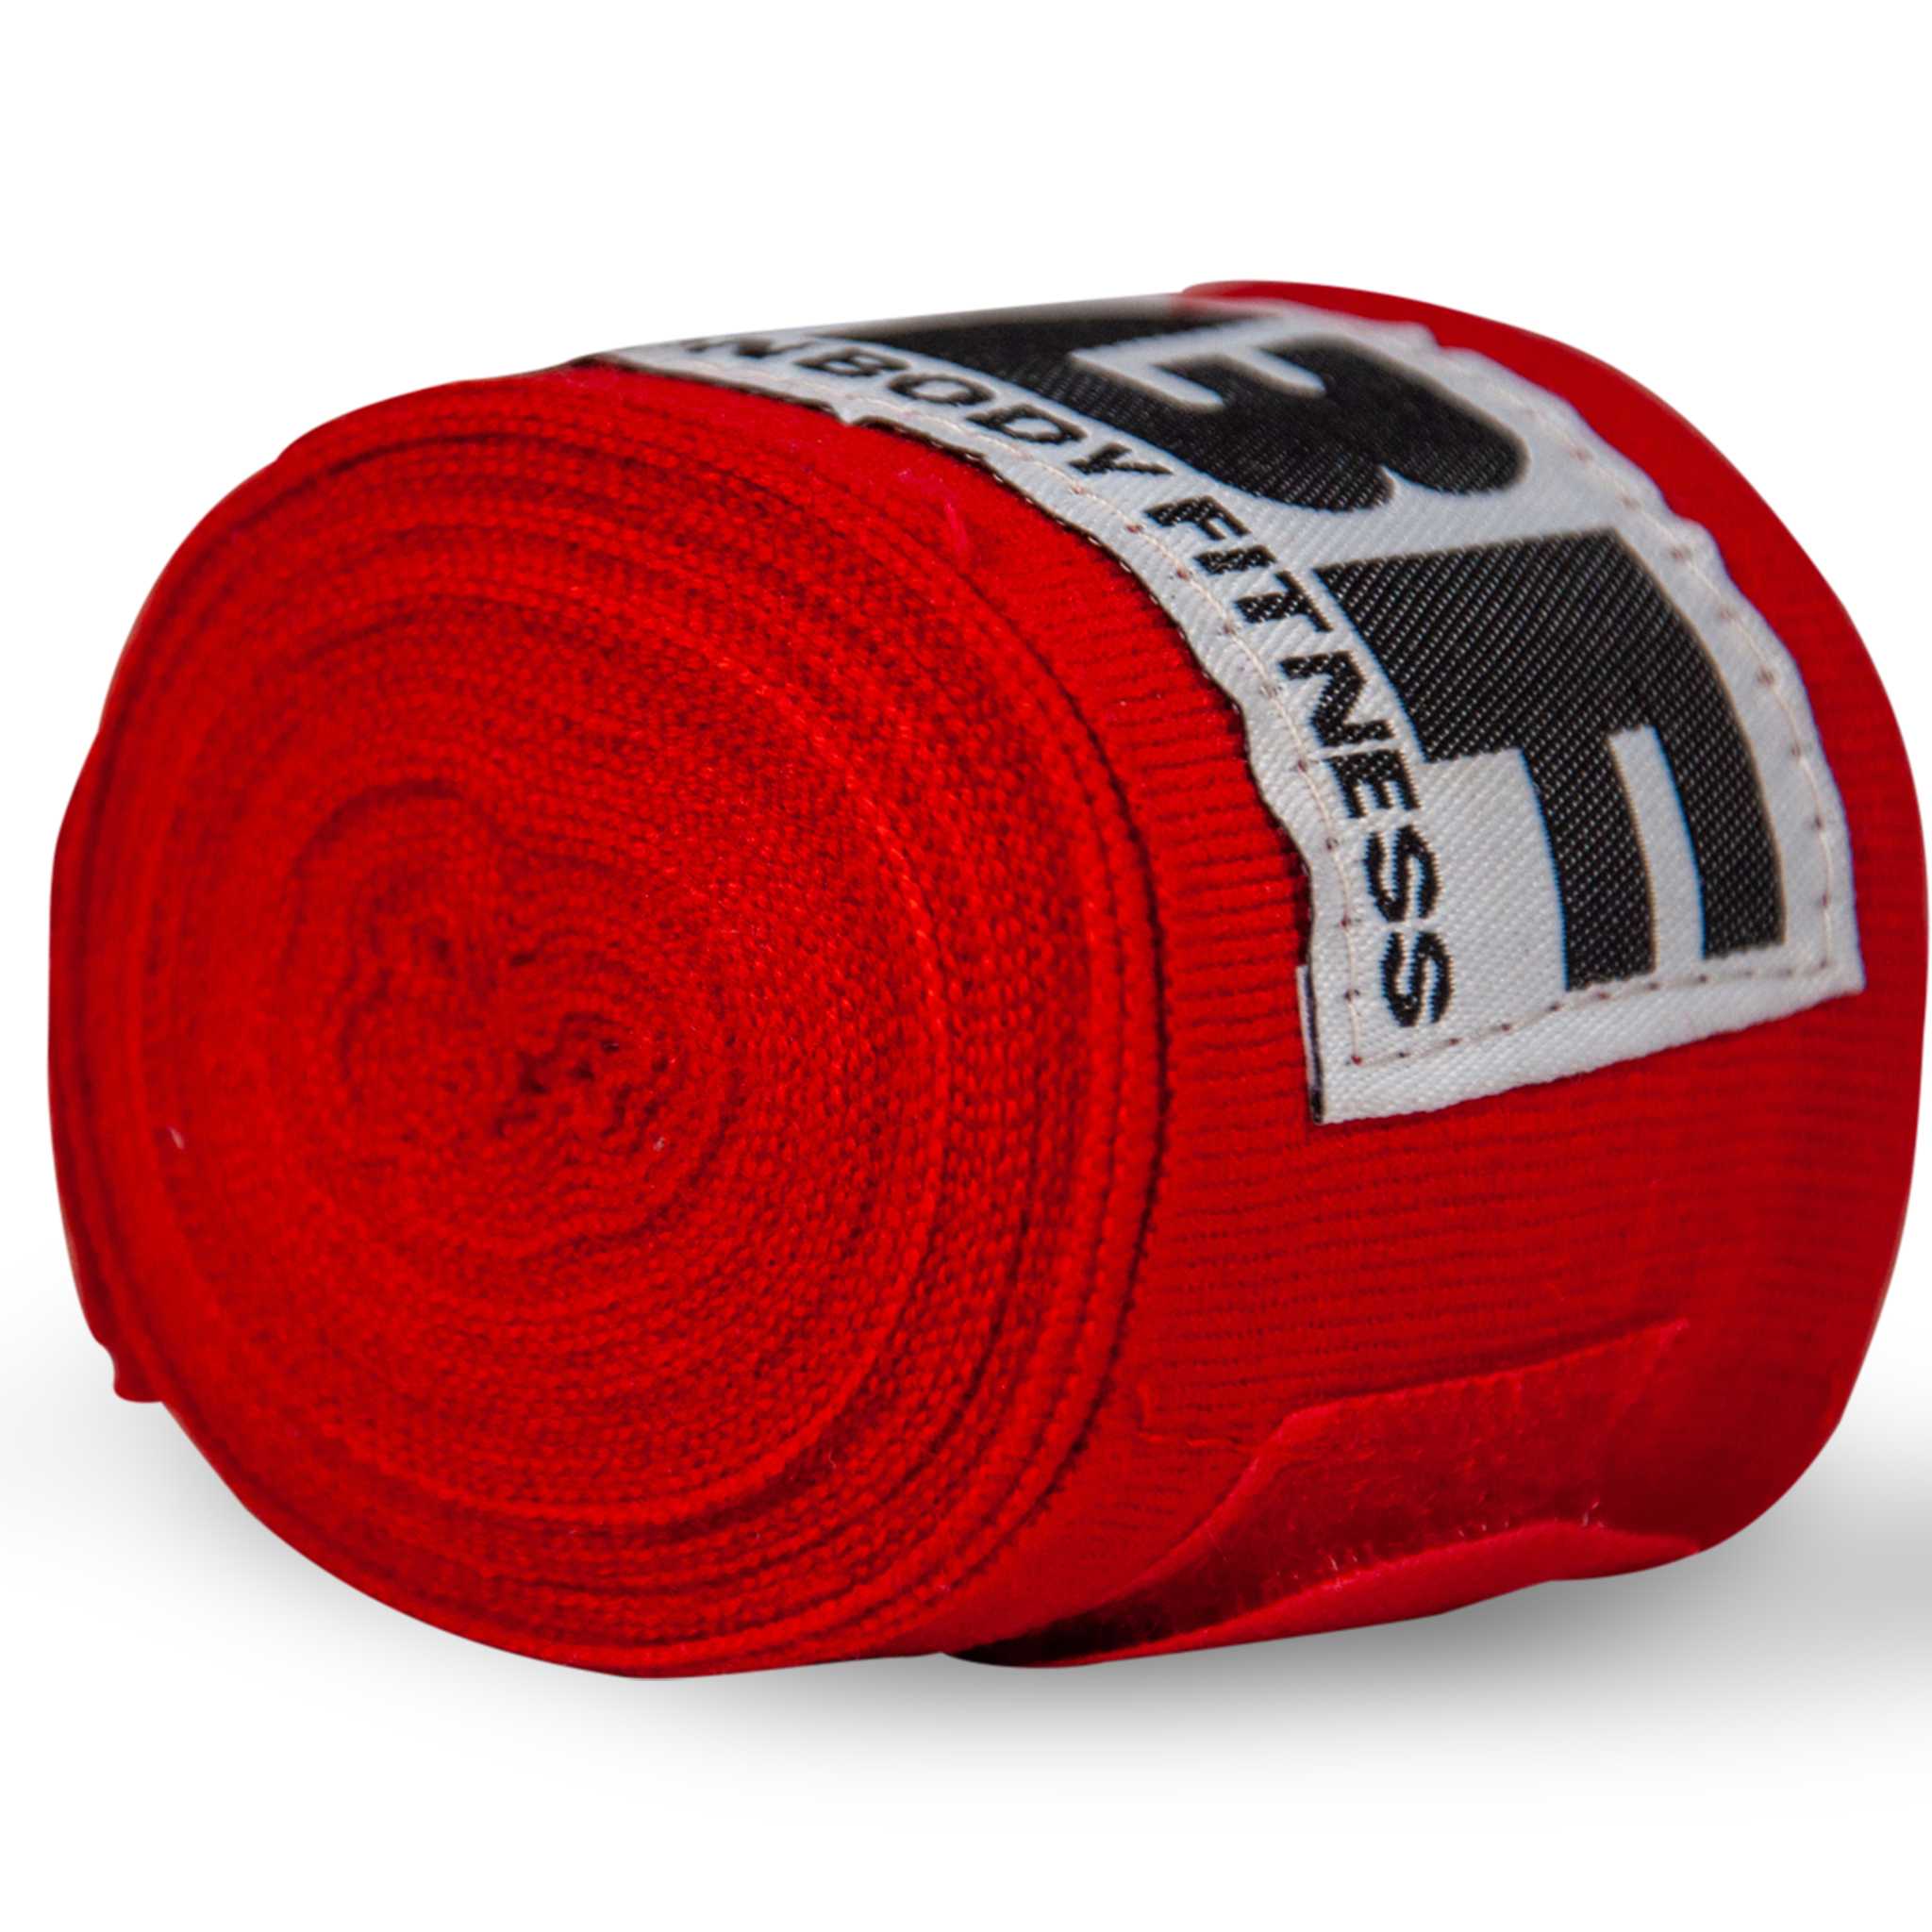 IBF Mexican-Style Hand Wraps for Boxing Gloves